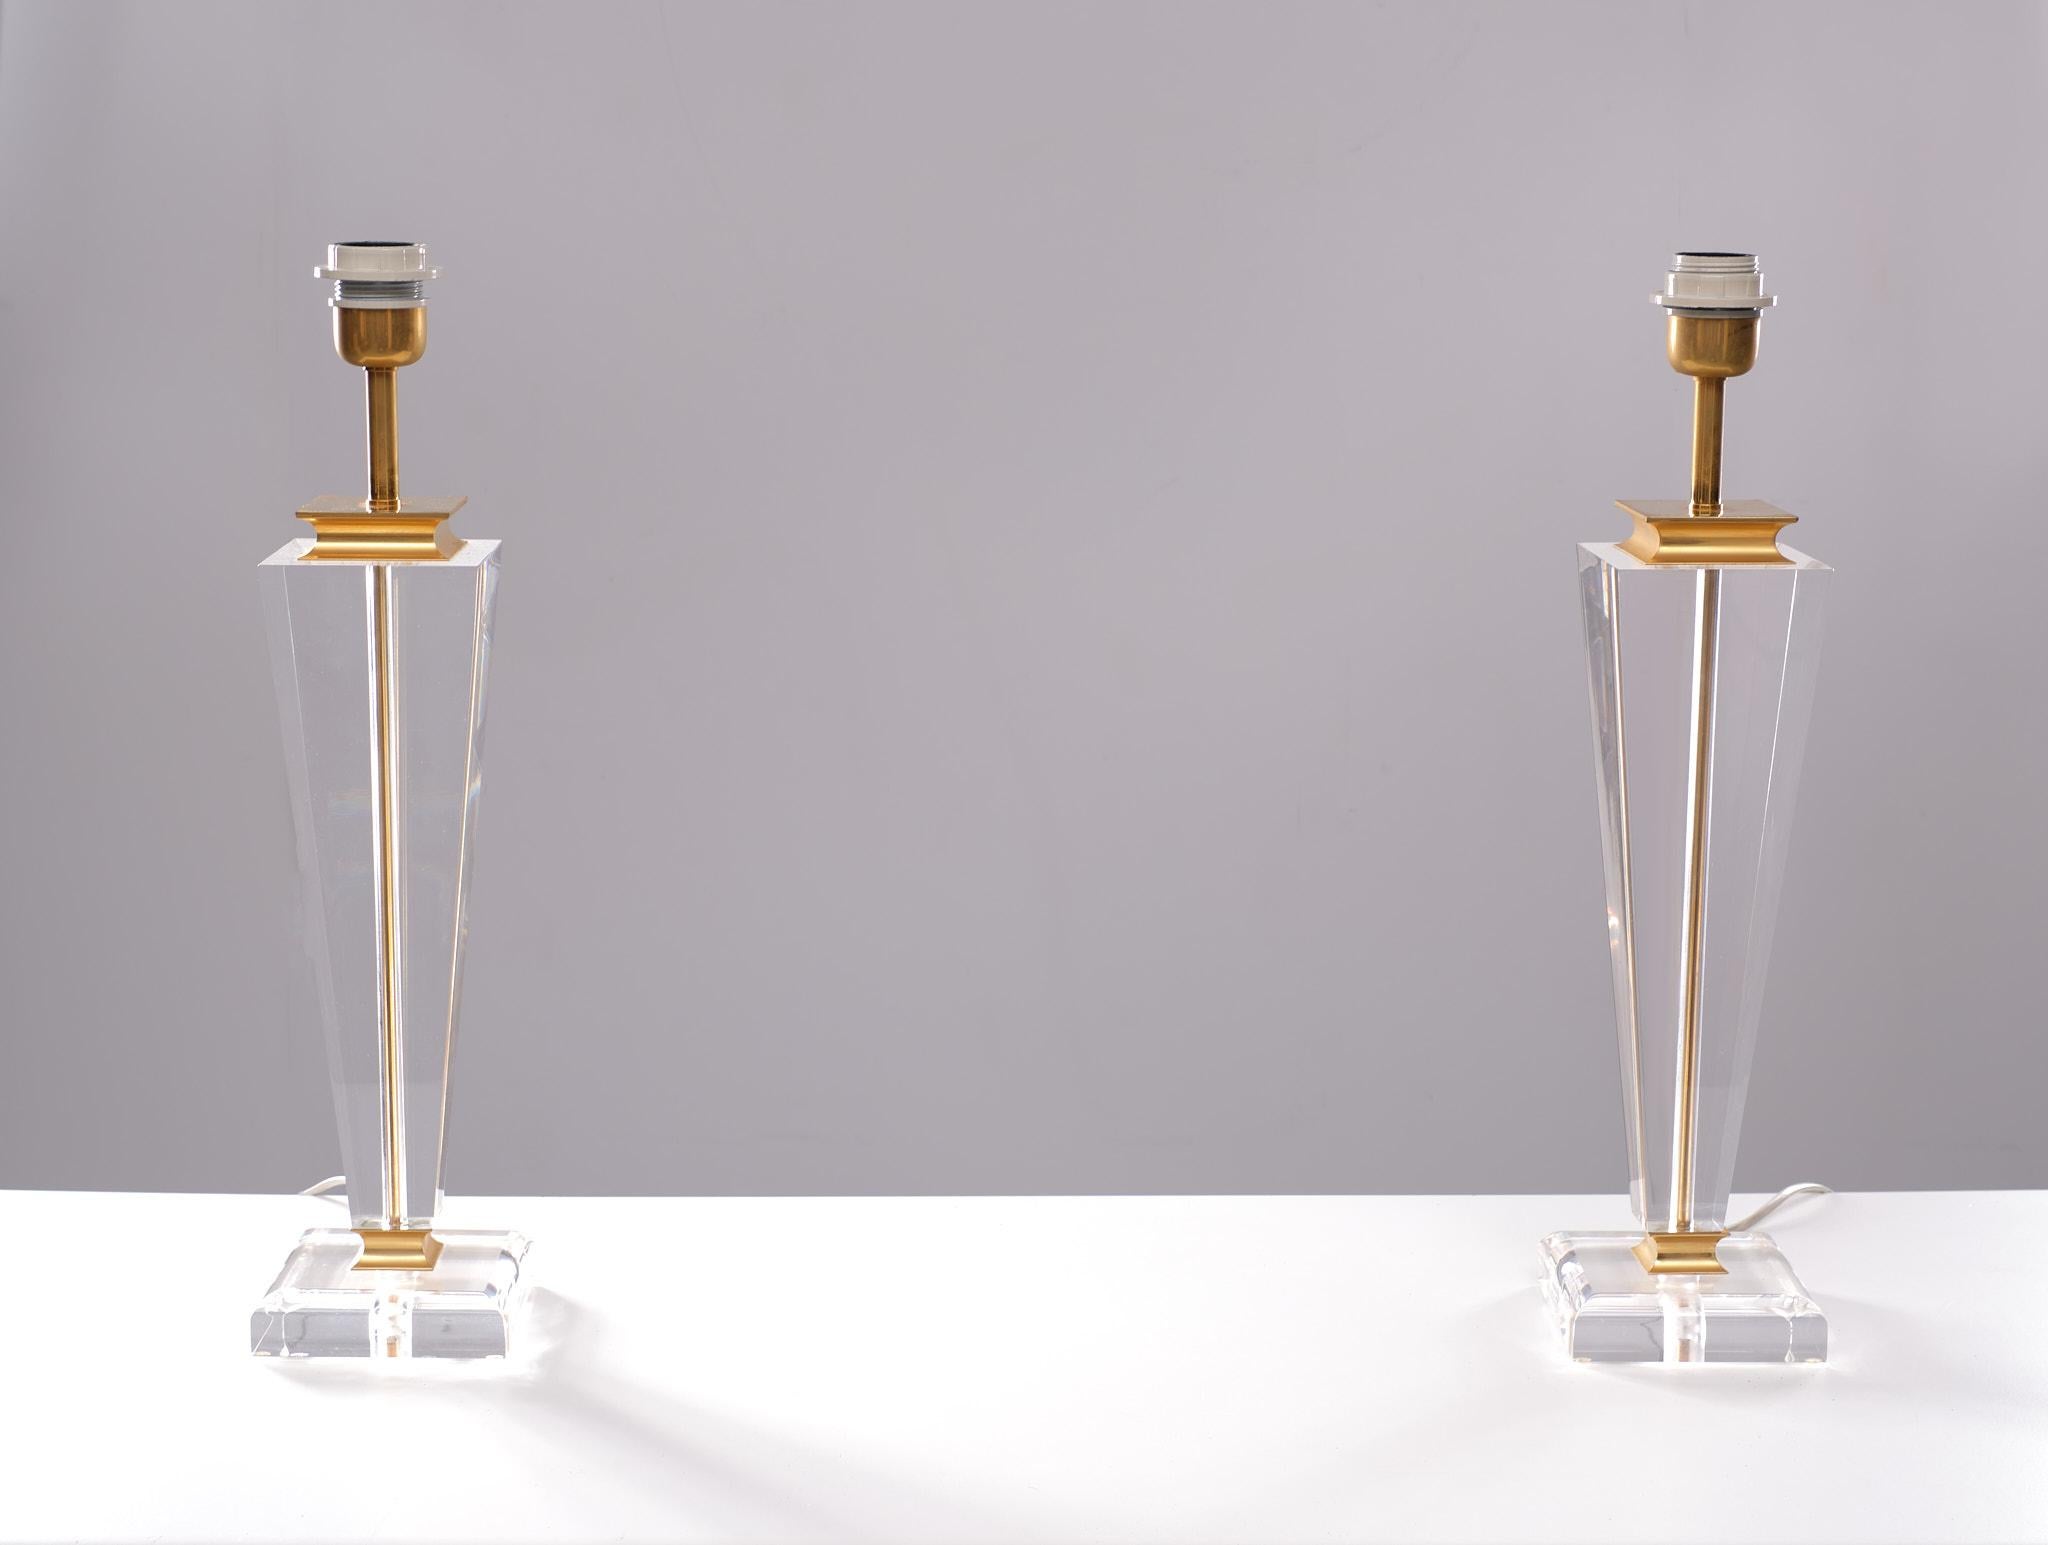 Hollywood Regency Parigi  Lucite table lamps  1970s Italy  For Sale 5